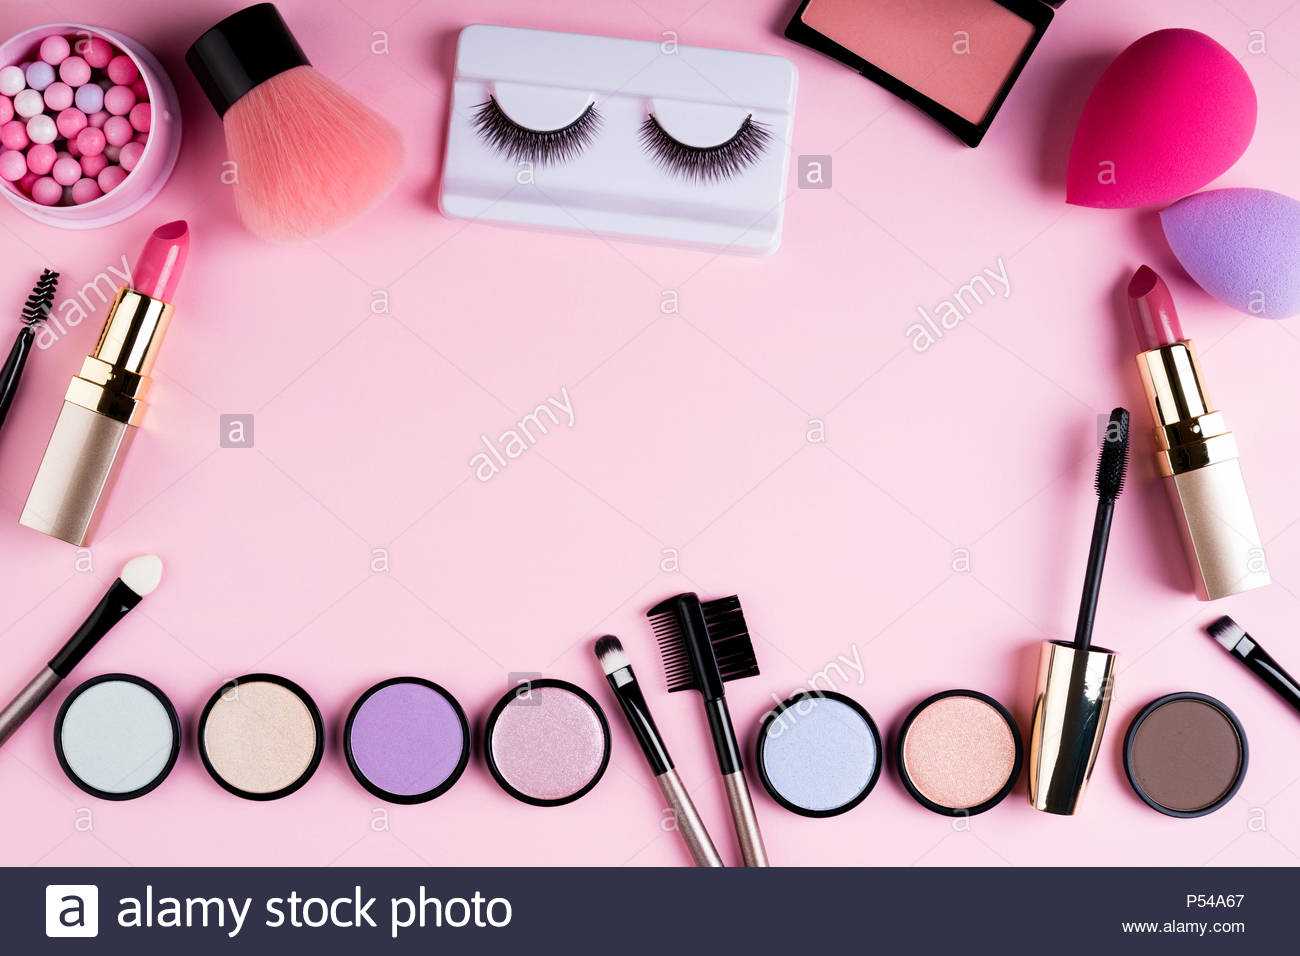 Makeup Products And Decorative Cosmetics On Pink Background Flat